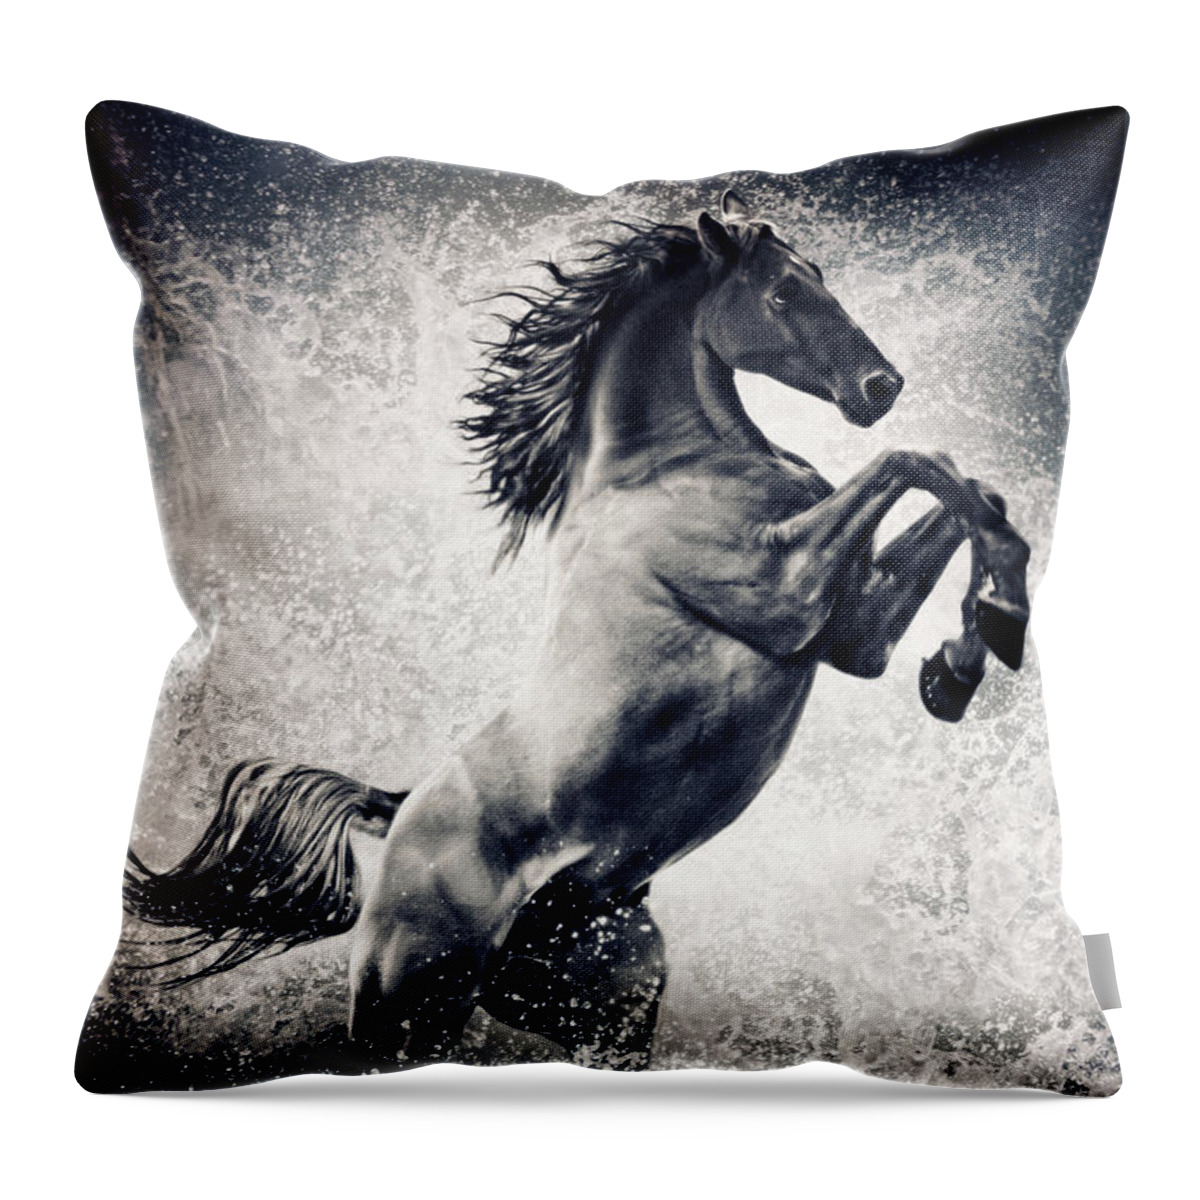 Horse Throw Pillow featuring the photograph The Black Stallion Arabian Horse Reared Up by Dimitar Hristov